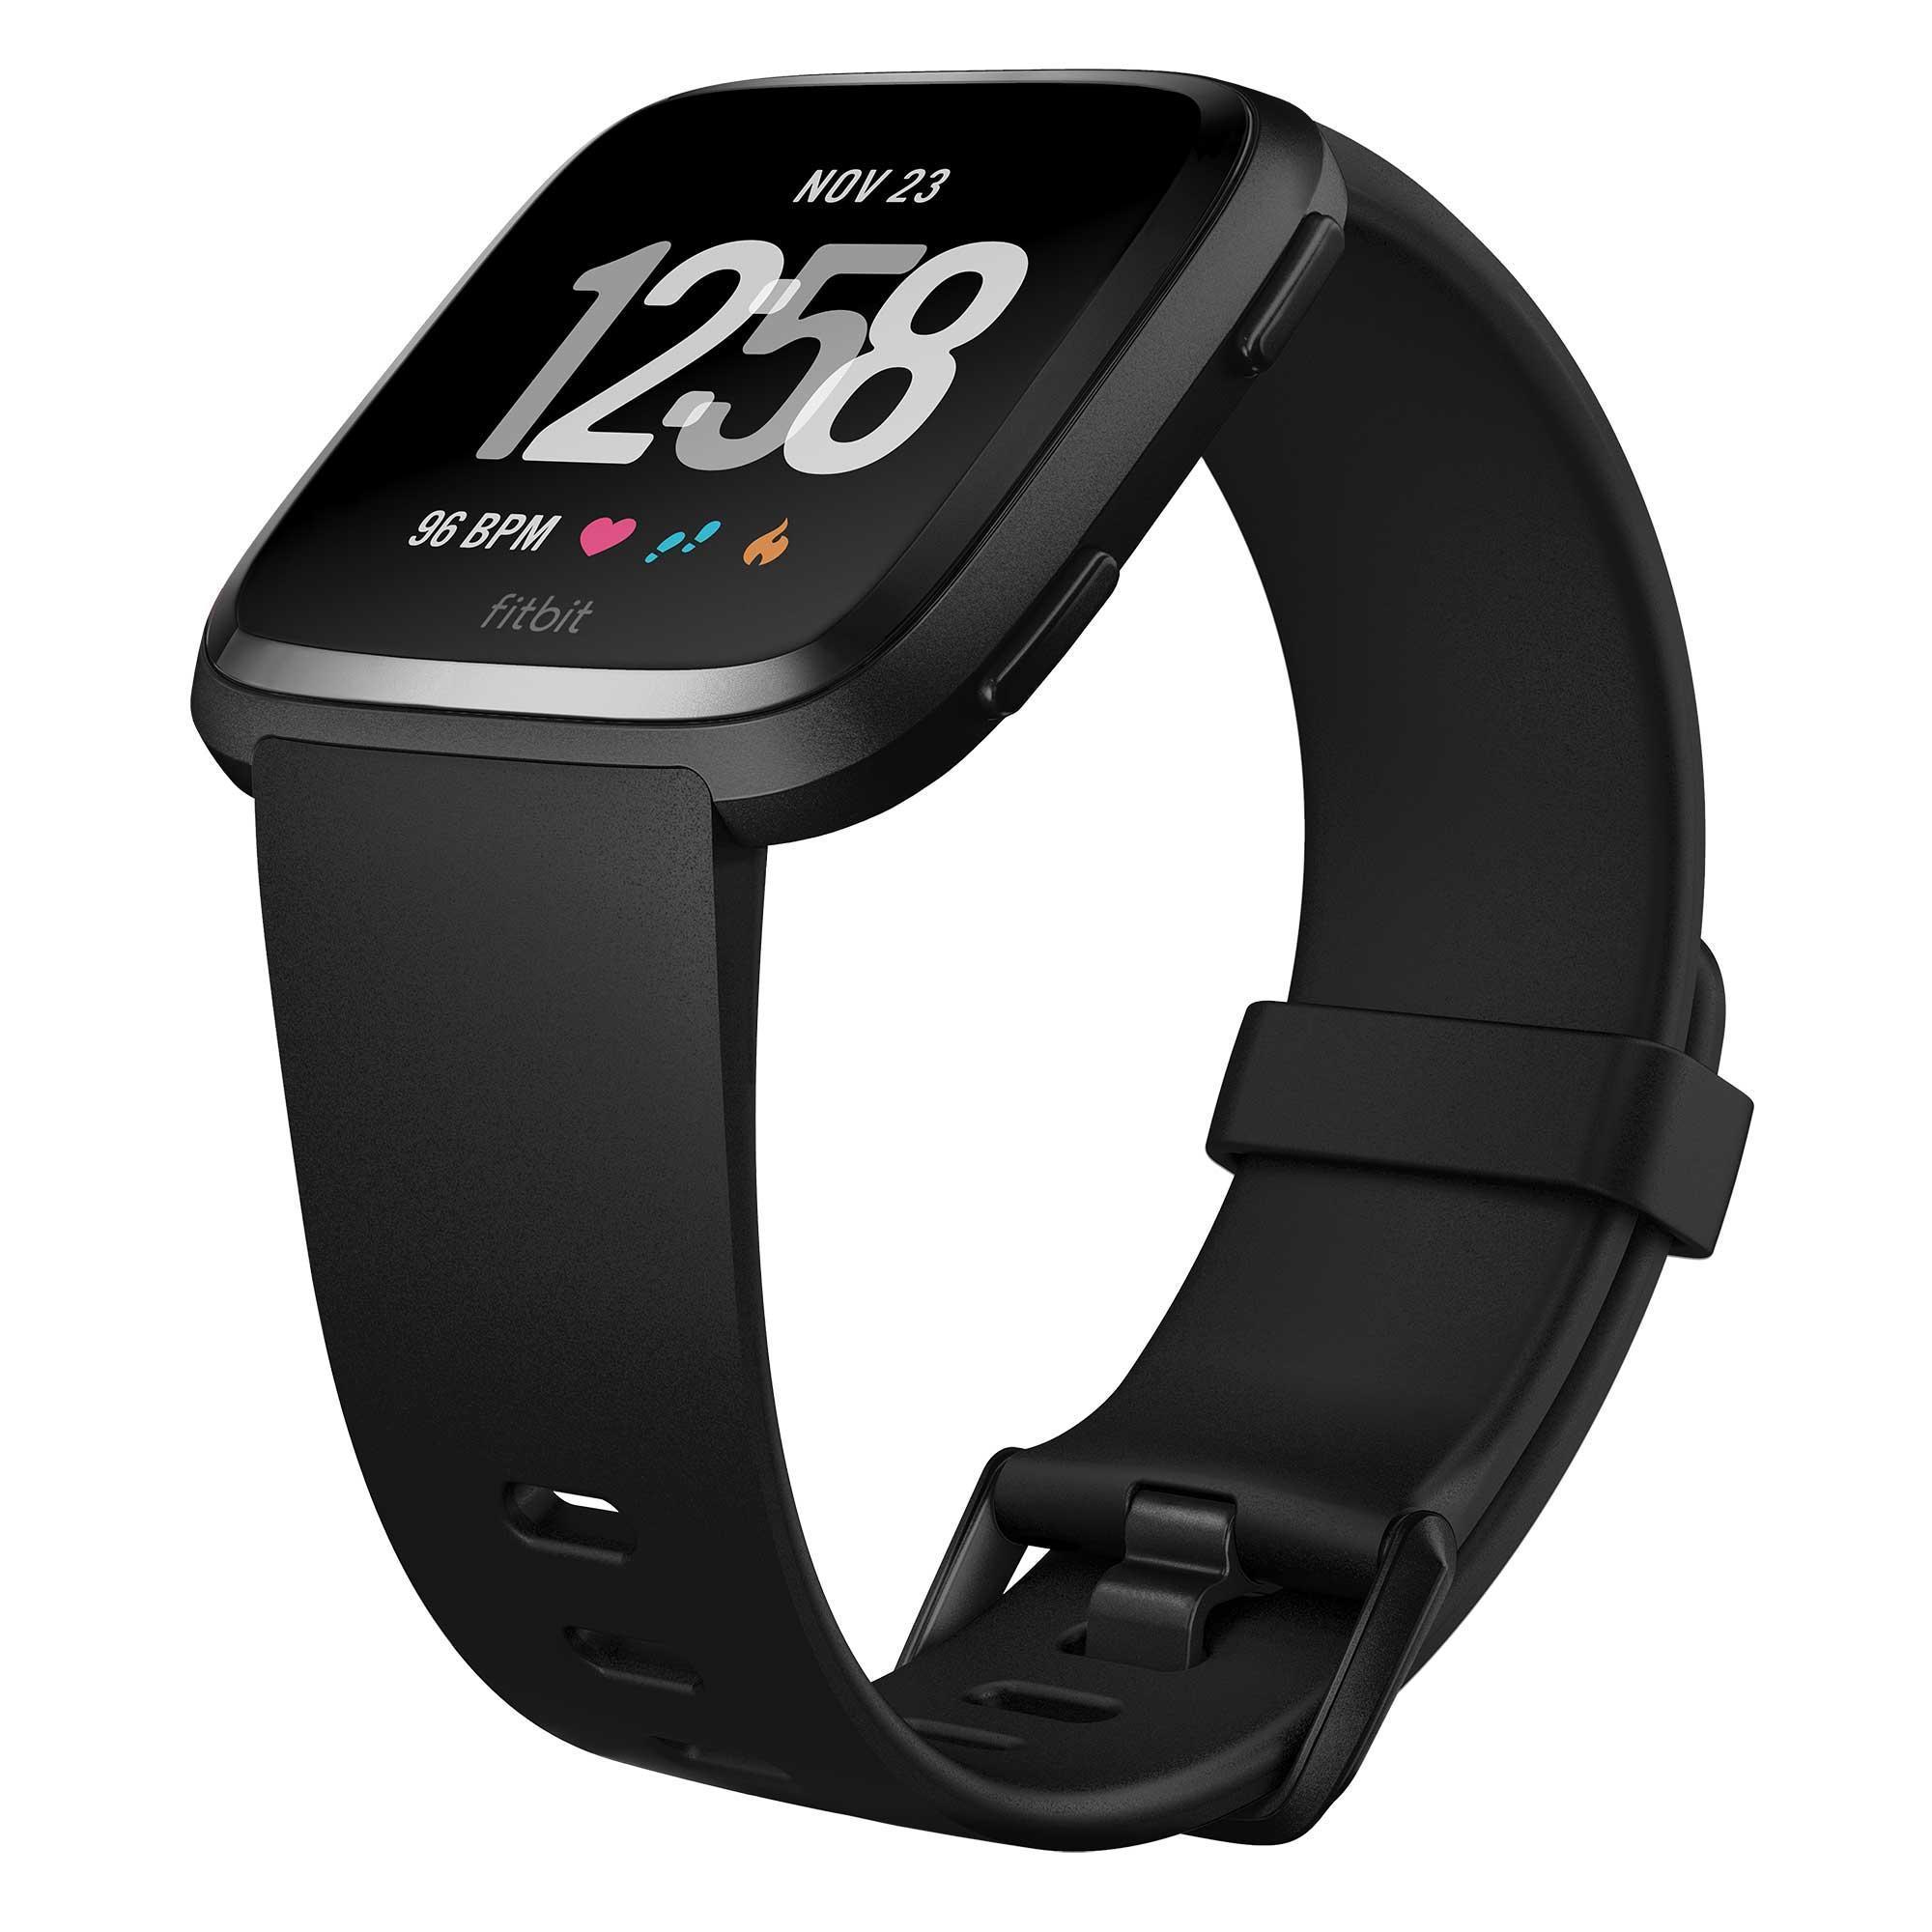 VERSA CONNECTED WRISTWATCH WITH HEART 